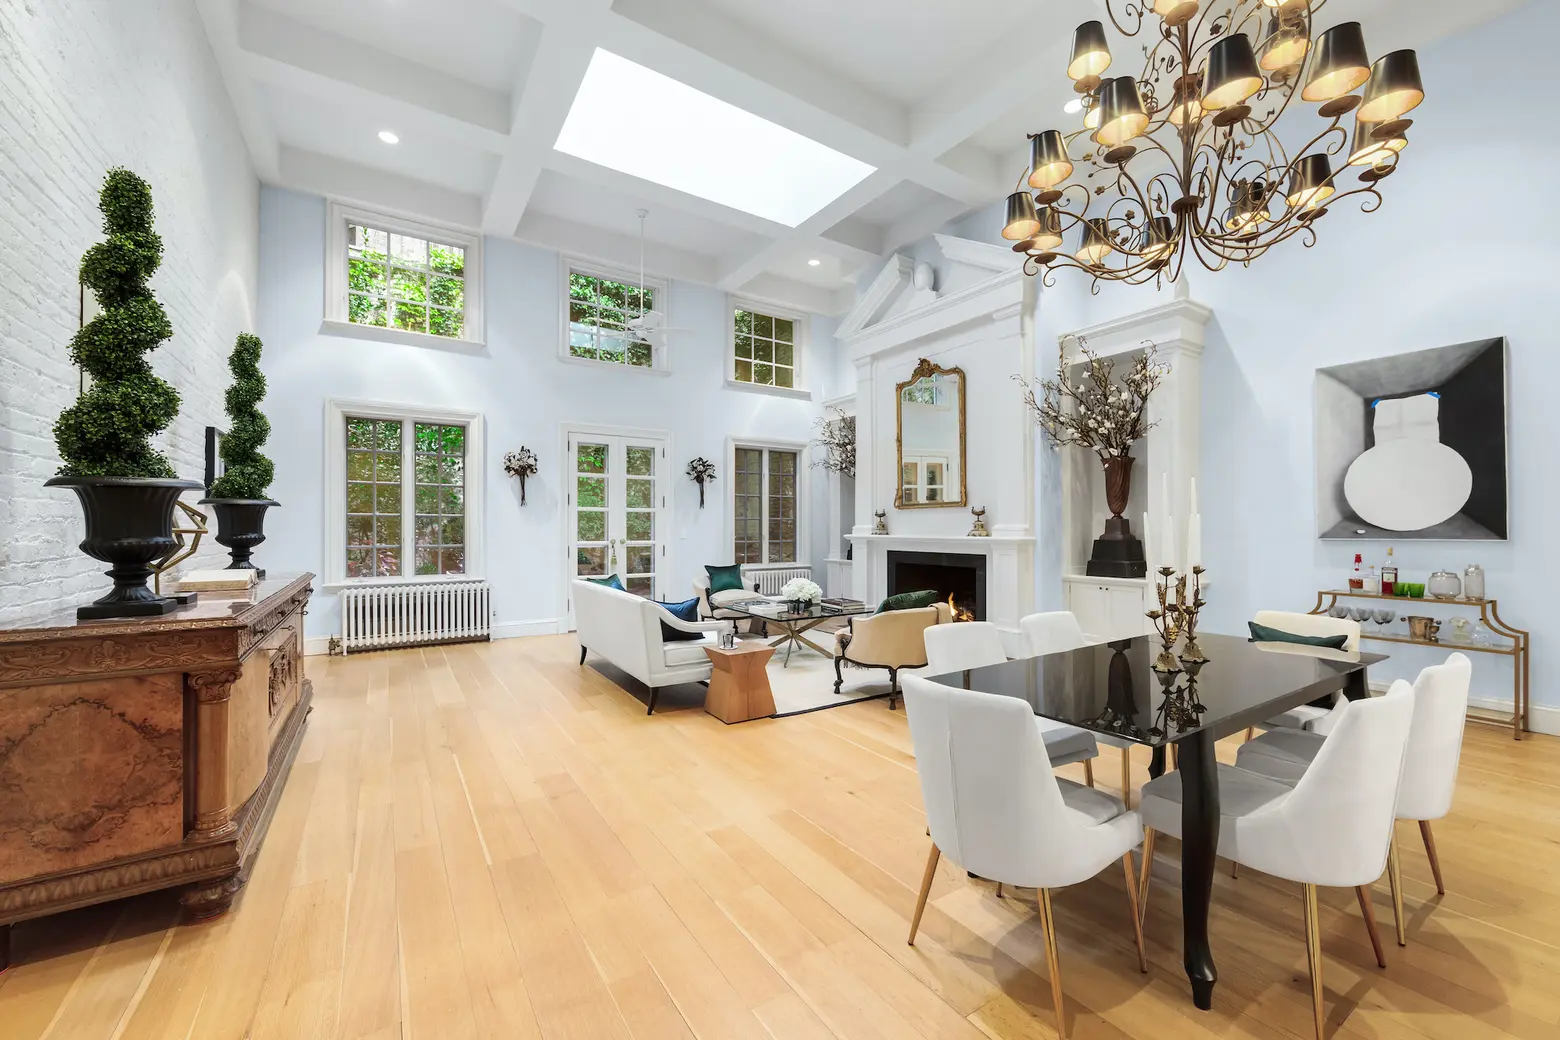 $13.8M carriage house feels like a mini palazzo right in Chelsea